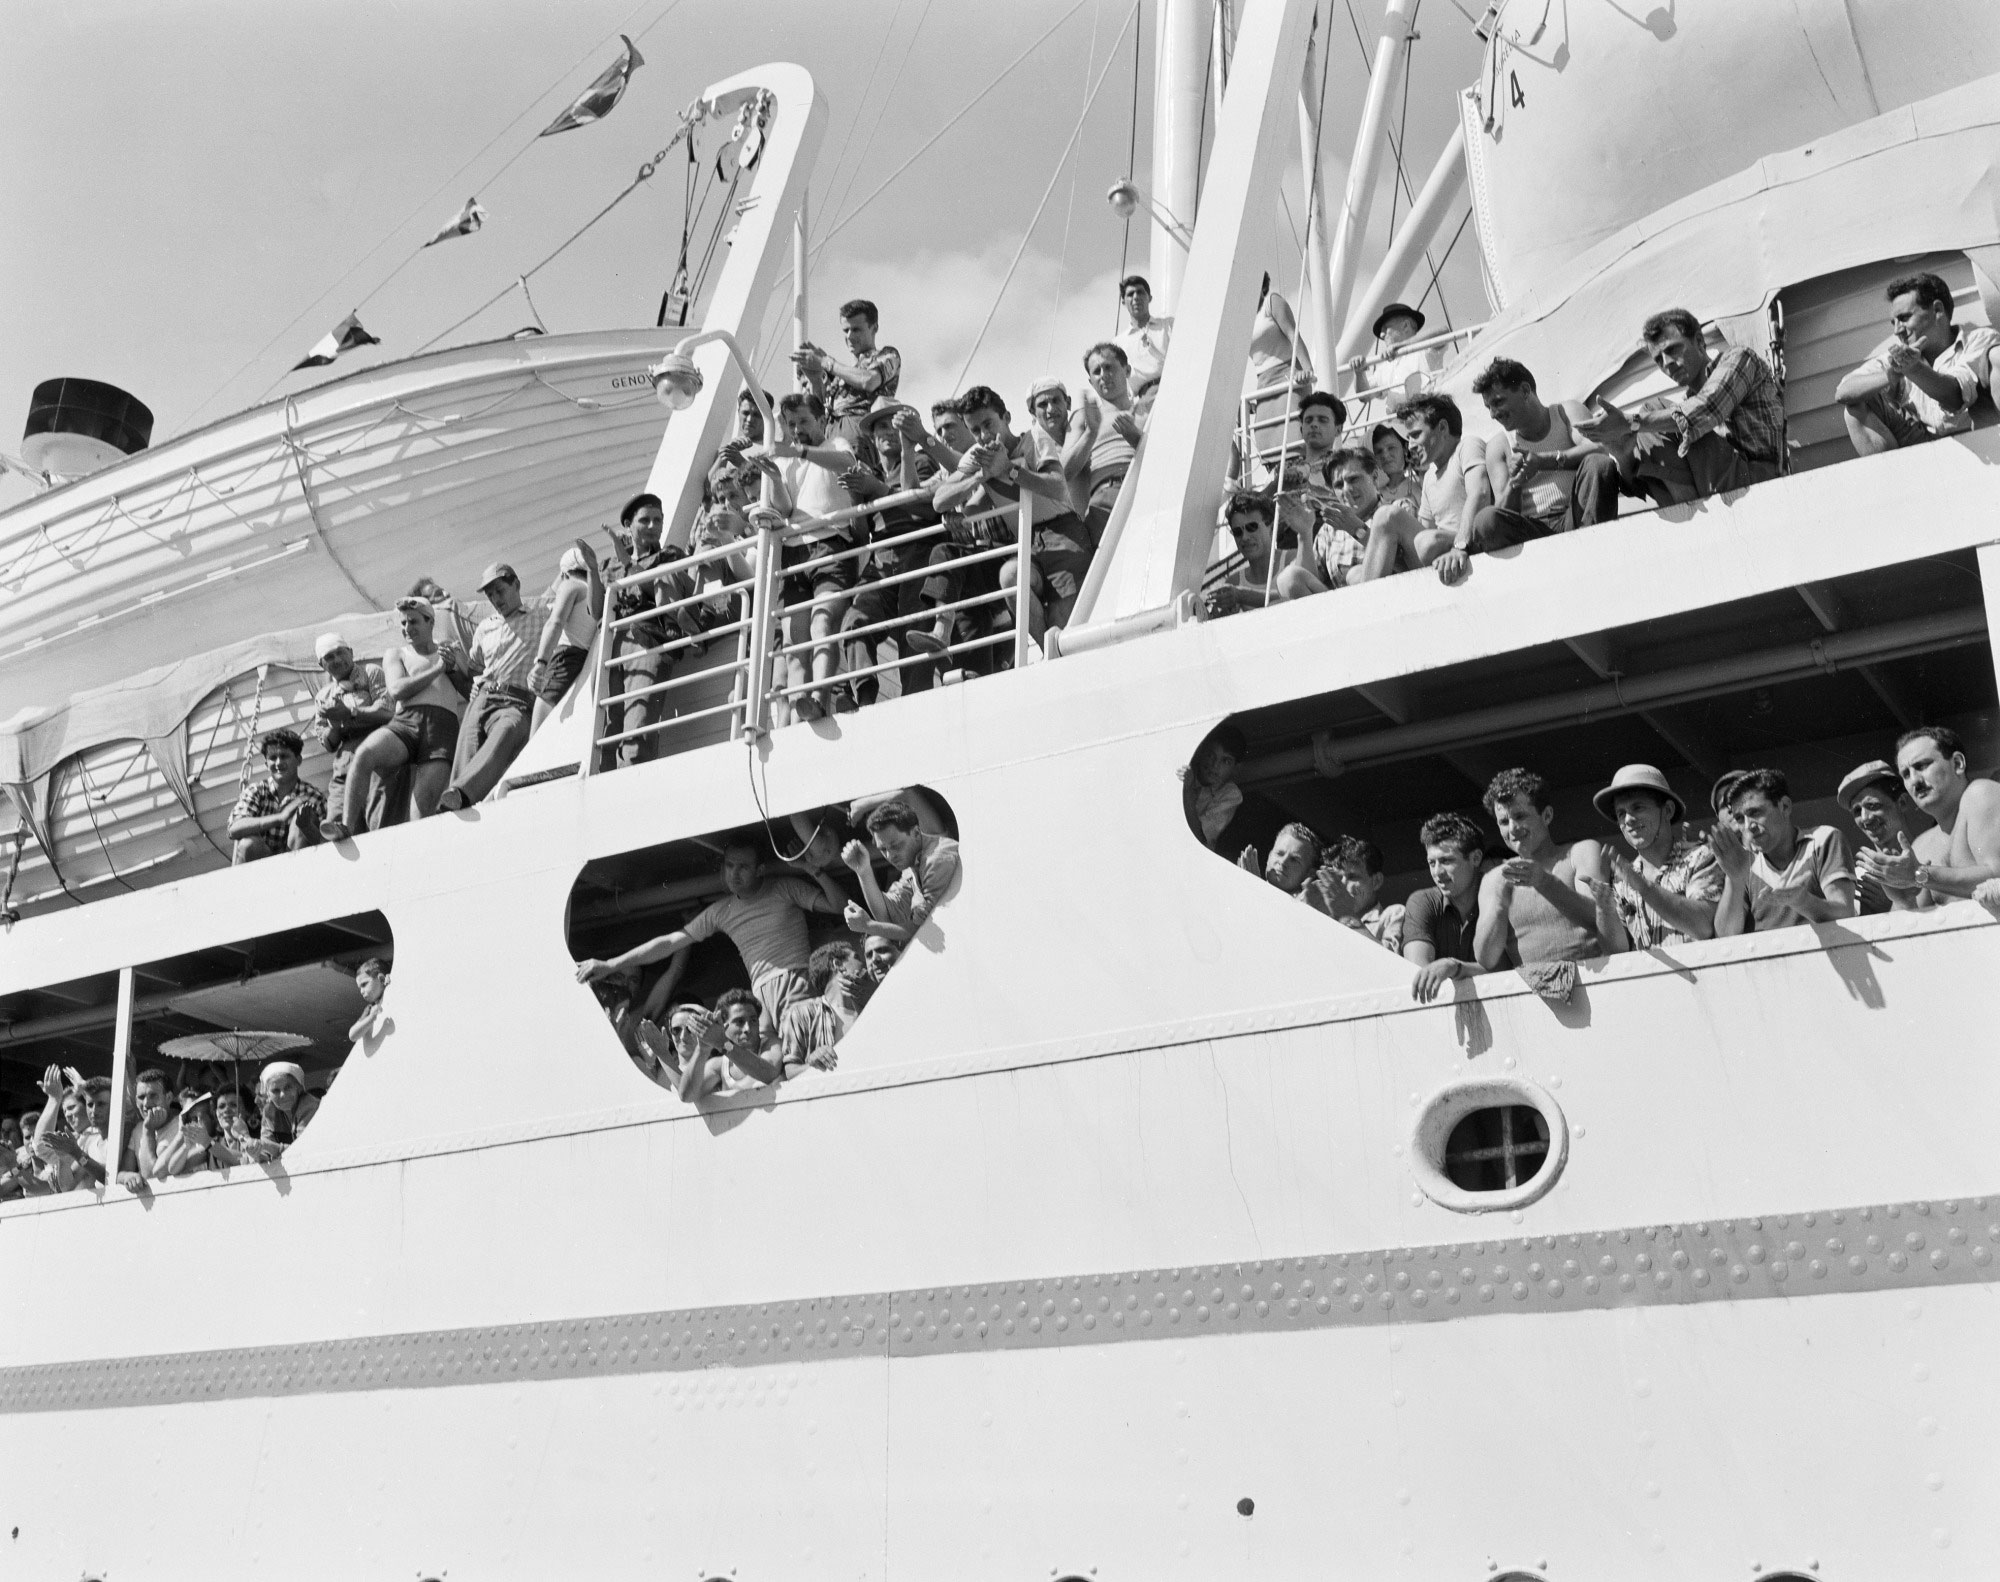 <p>Italian canecutters arrive at Cairns aboard the Aurelia, 1956</p>
